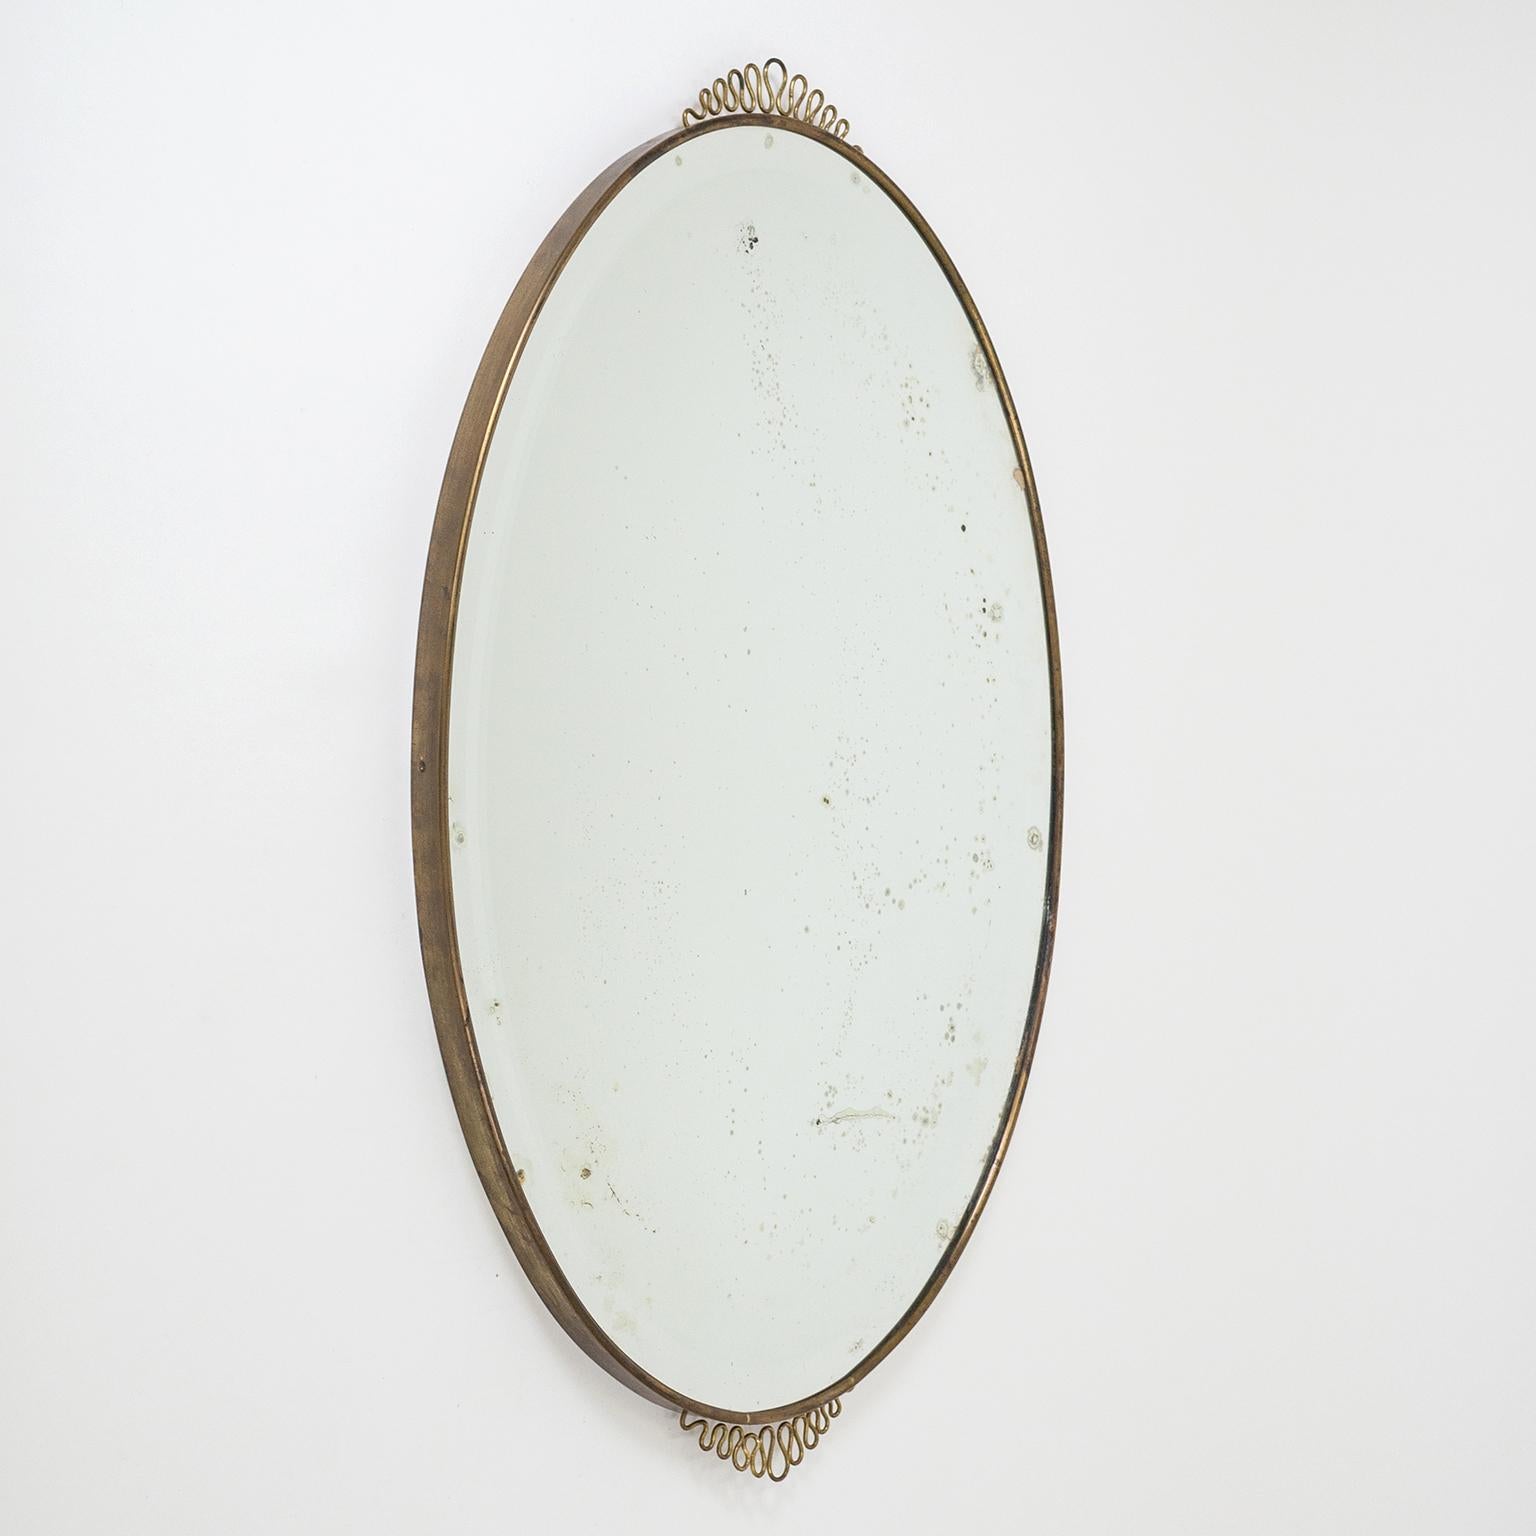 Lovely oval Italian brass mirror from the 1940s in the style of Gio Ponti. Adorned with two undulating brass finials. There is a charming patina on the brass and heavy wear on the original faceted mirror with blind spots and corrosion to the silver